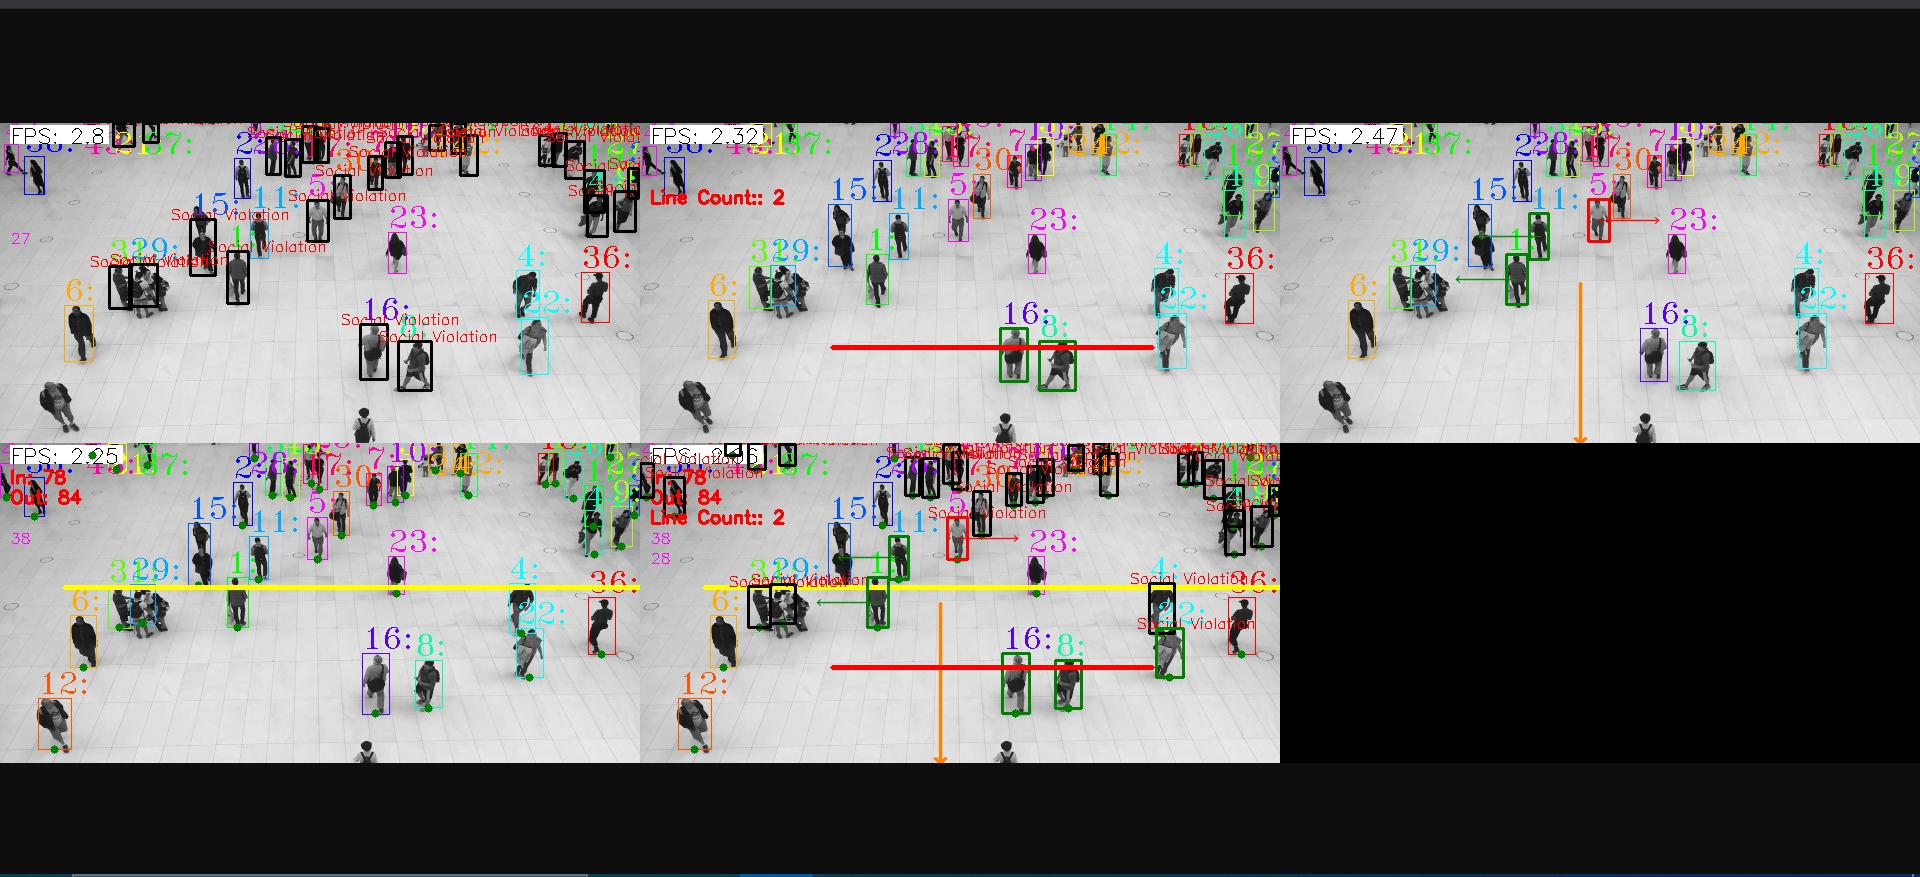 Screenshot of 5 channels each with many people walking in a building. Some of red bounding boxes surrounding them that say "social violation" and others have blue boxes surrounding them. 